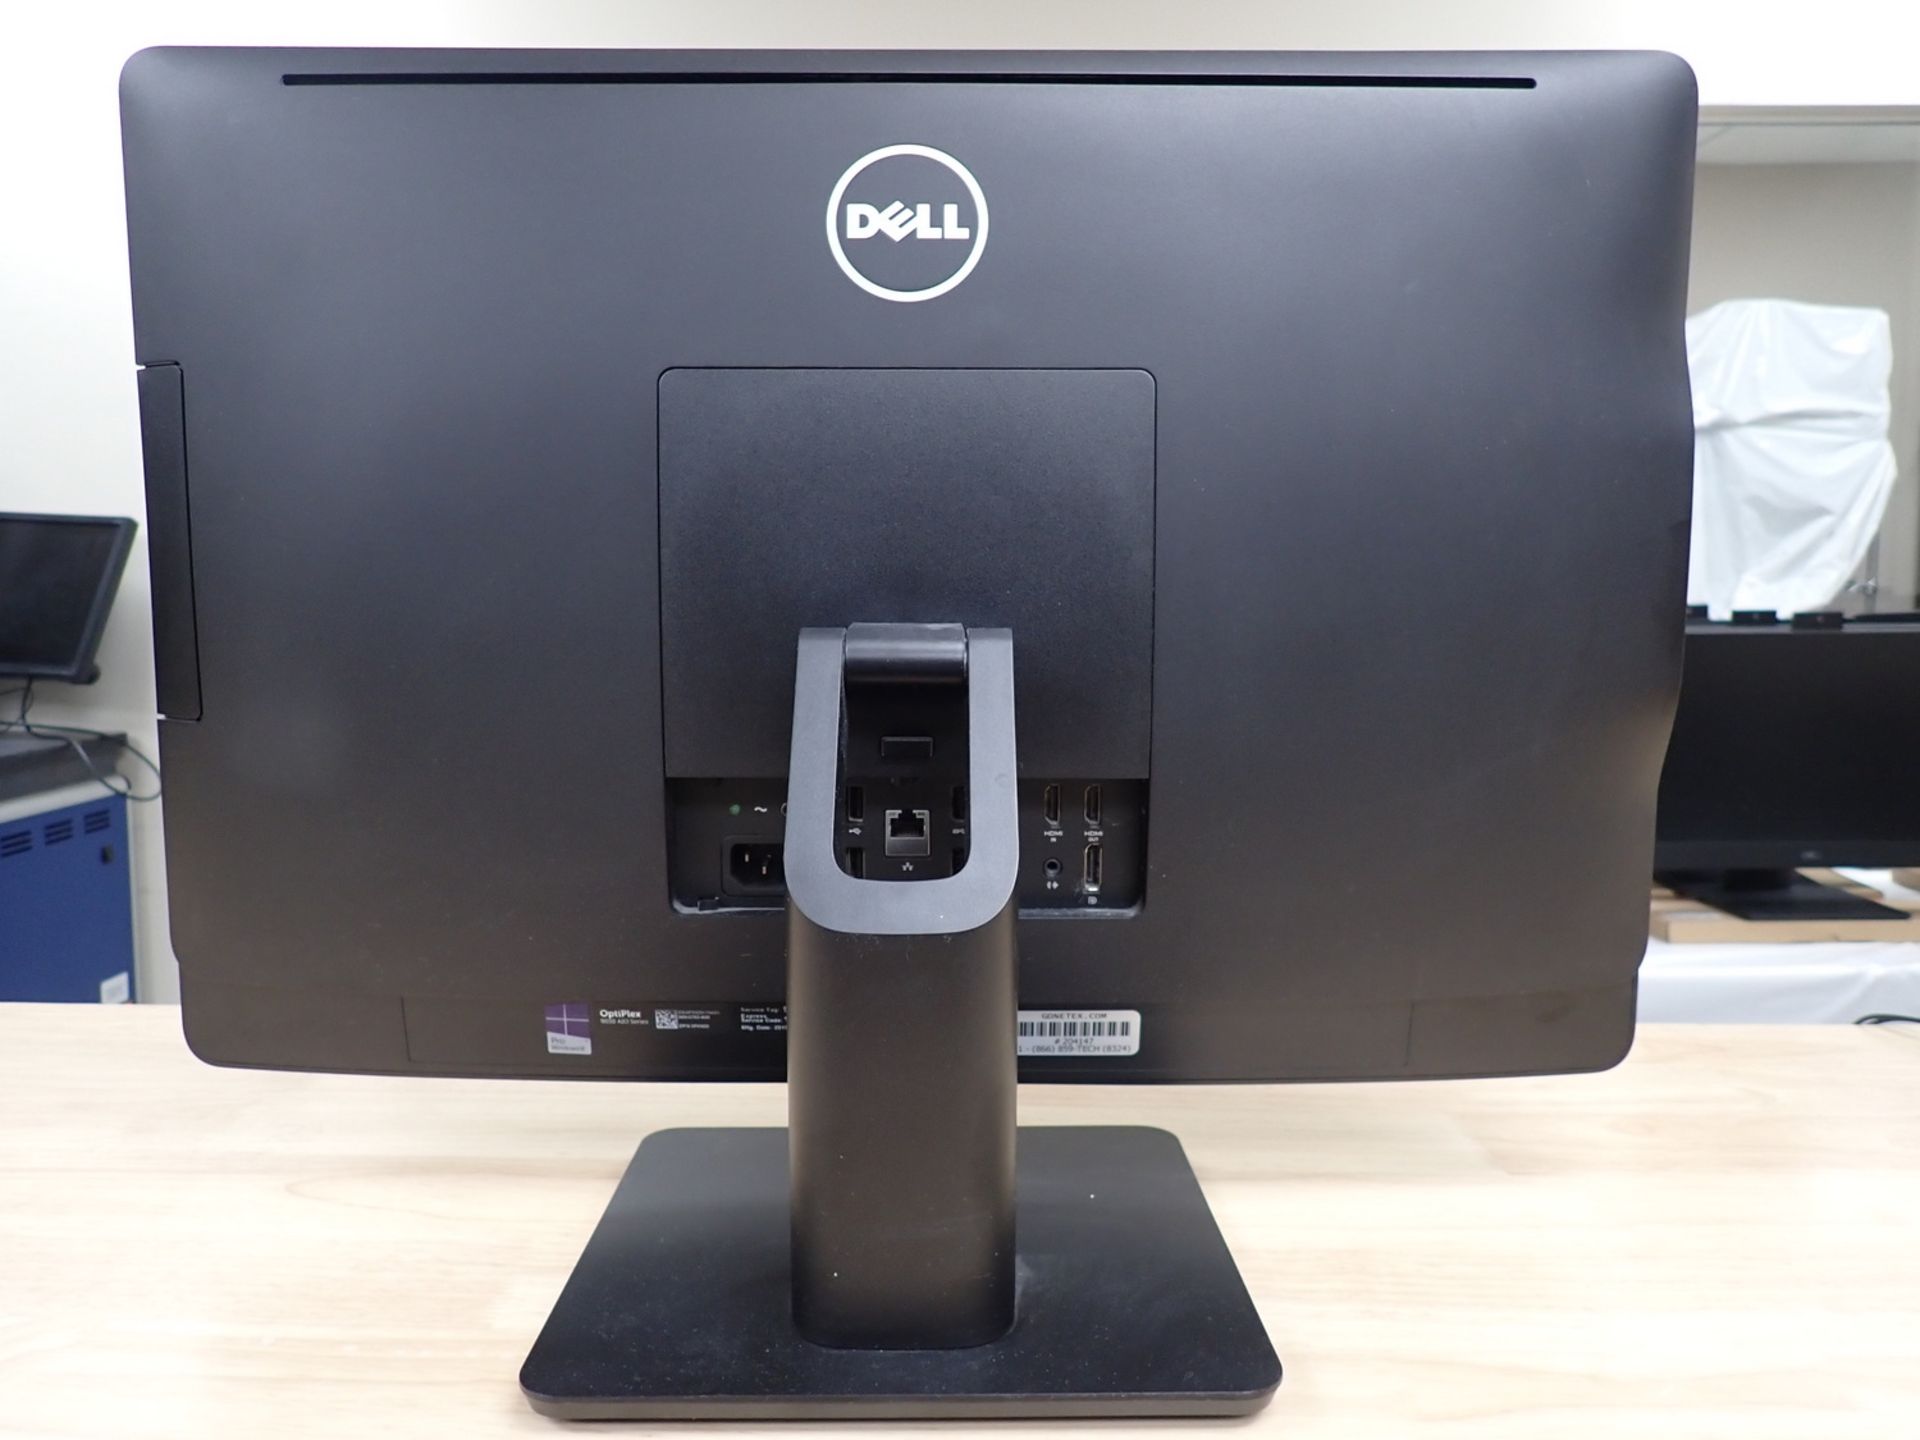 DELL OPTIPLEX 9030 ALL-IN-ONE PC W/ INTEL CORE I5-4590S 3.0GHZ CPU, 4GB RAM, 500GB HDD, W10 PRO, - Image 2 of 2